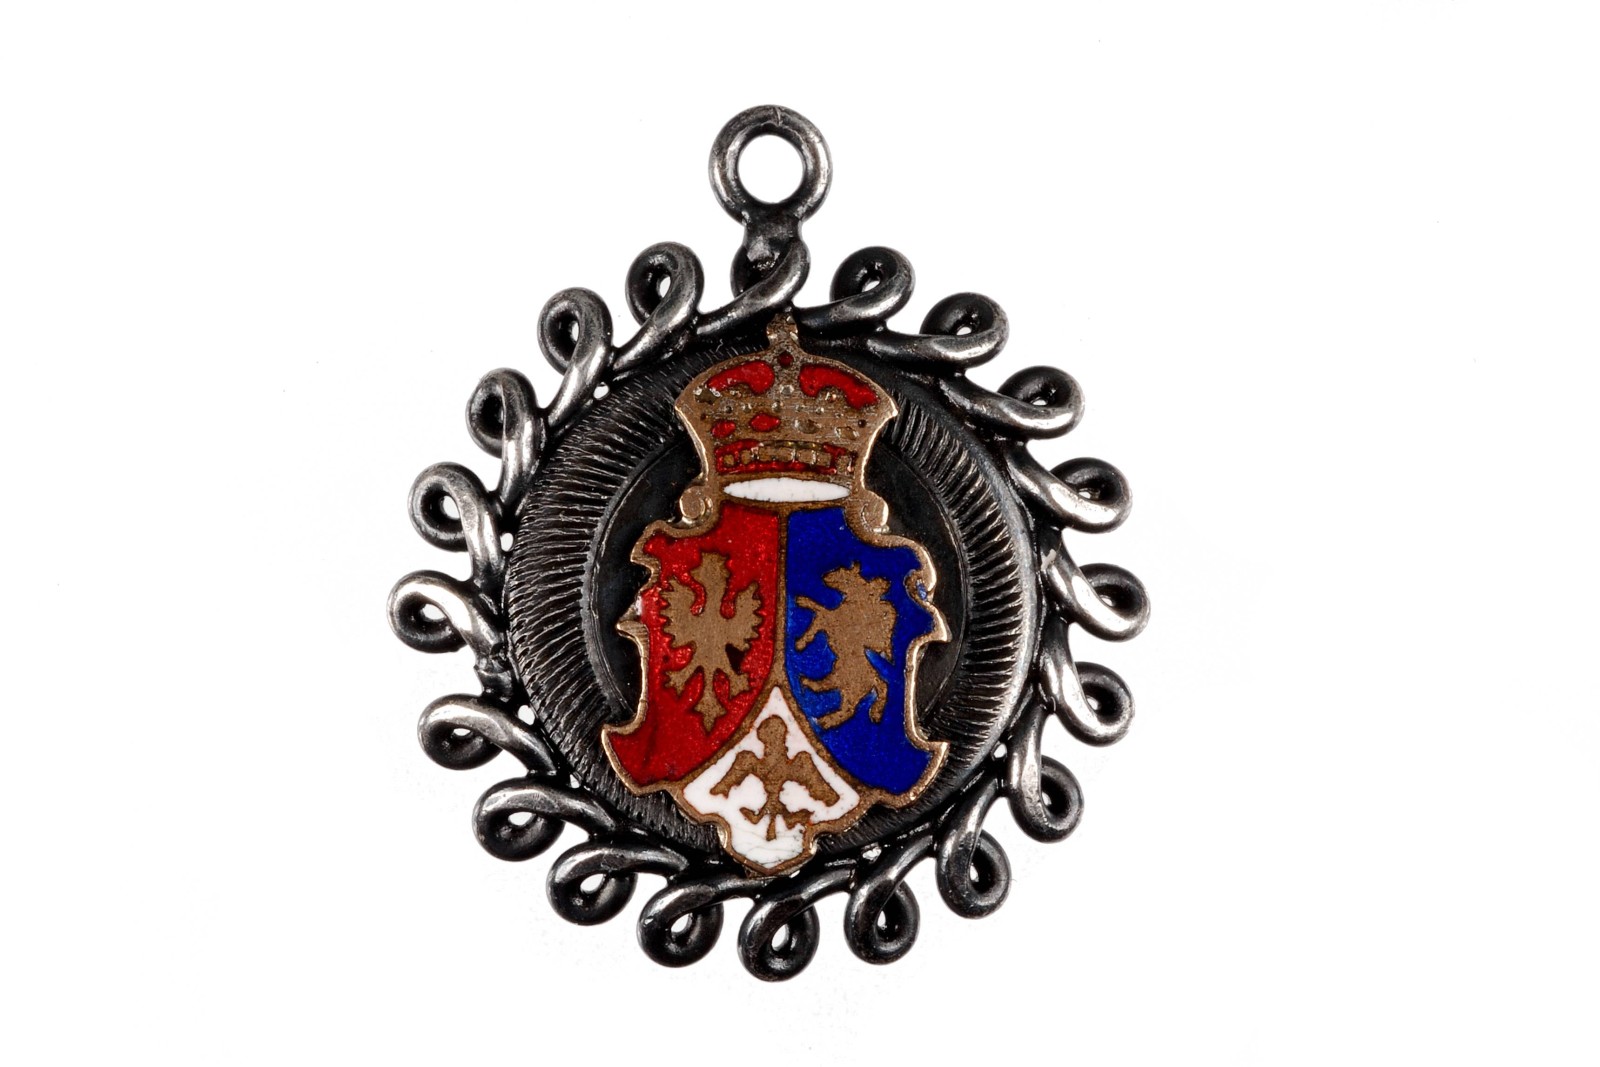 Polish Patriotic Jewelry, Museum of Independence, Warsaw, 2011